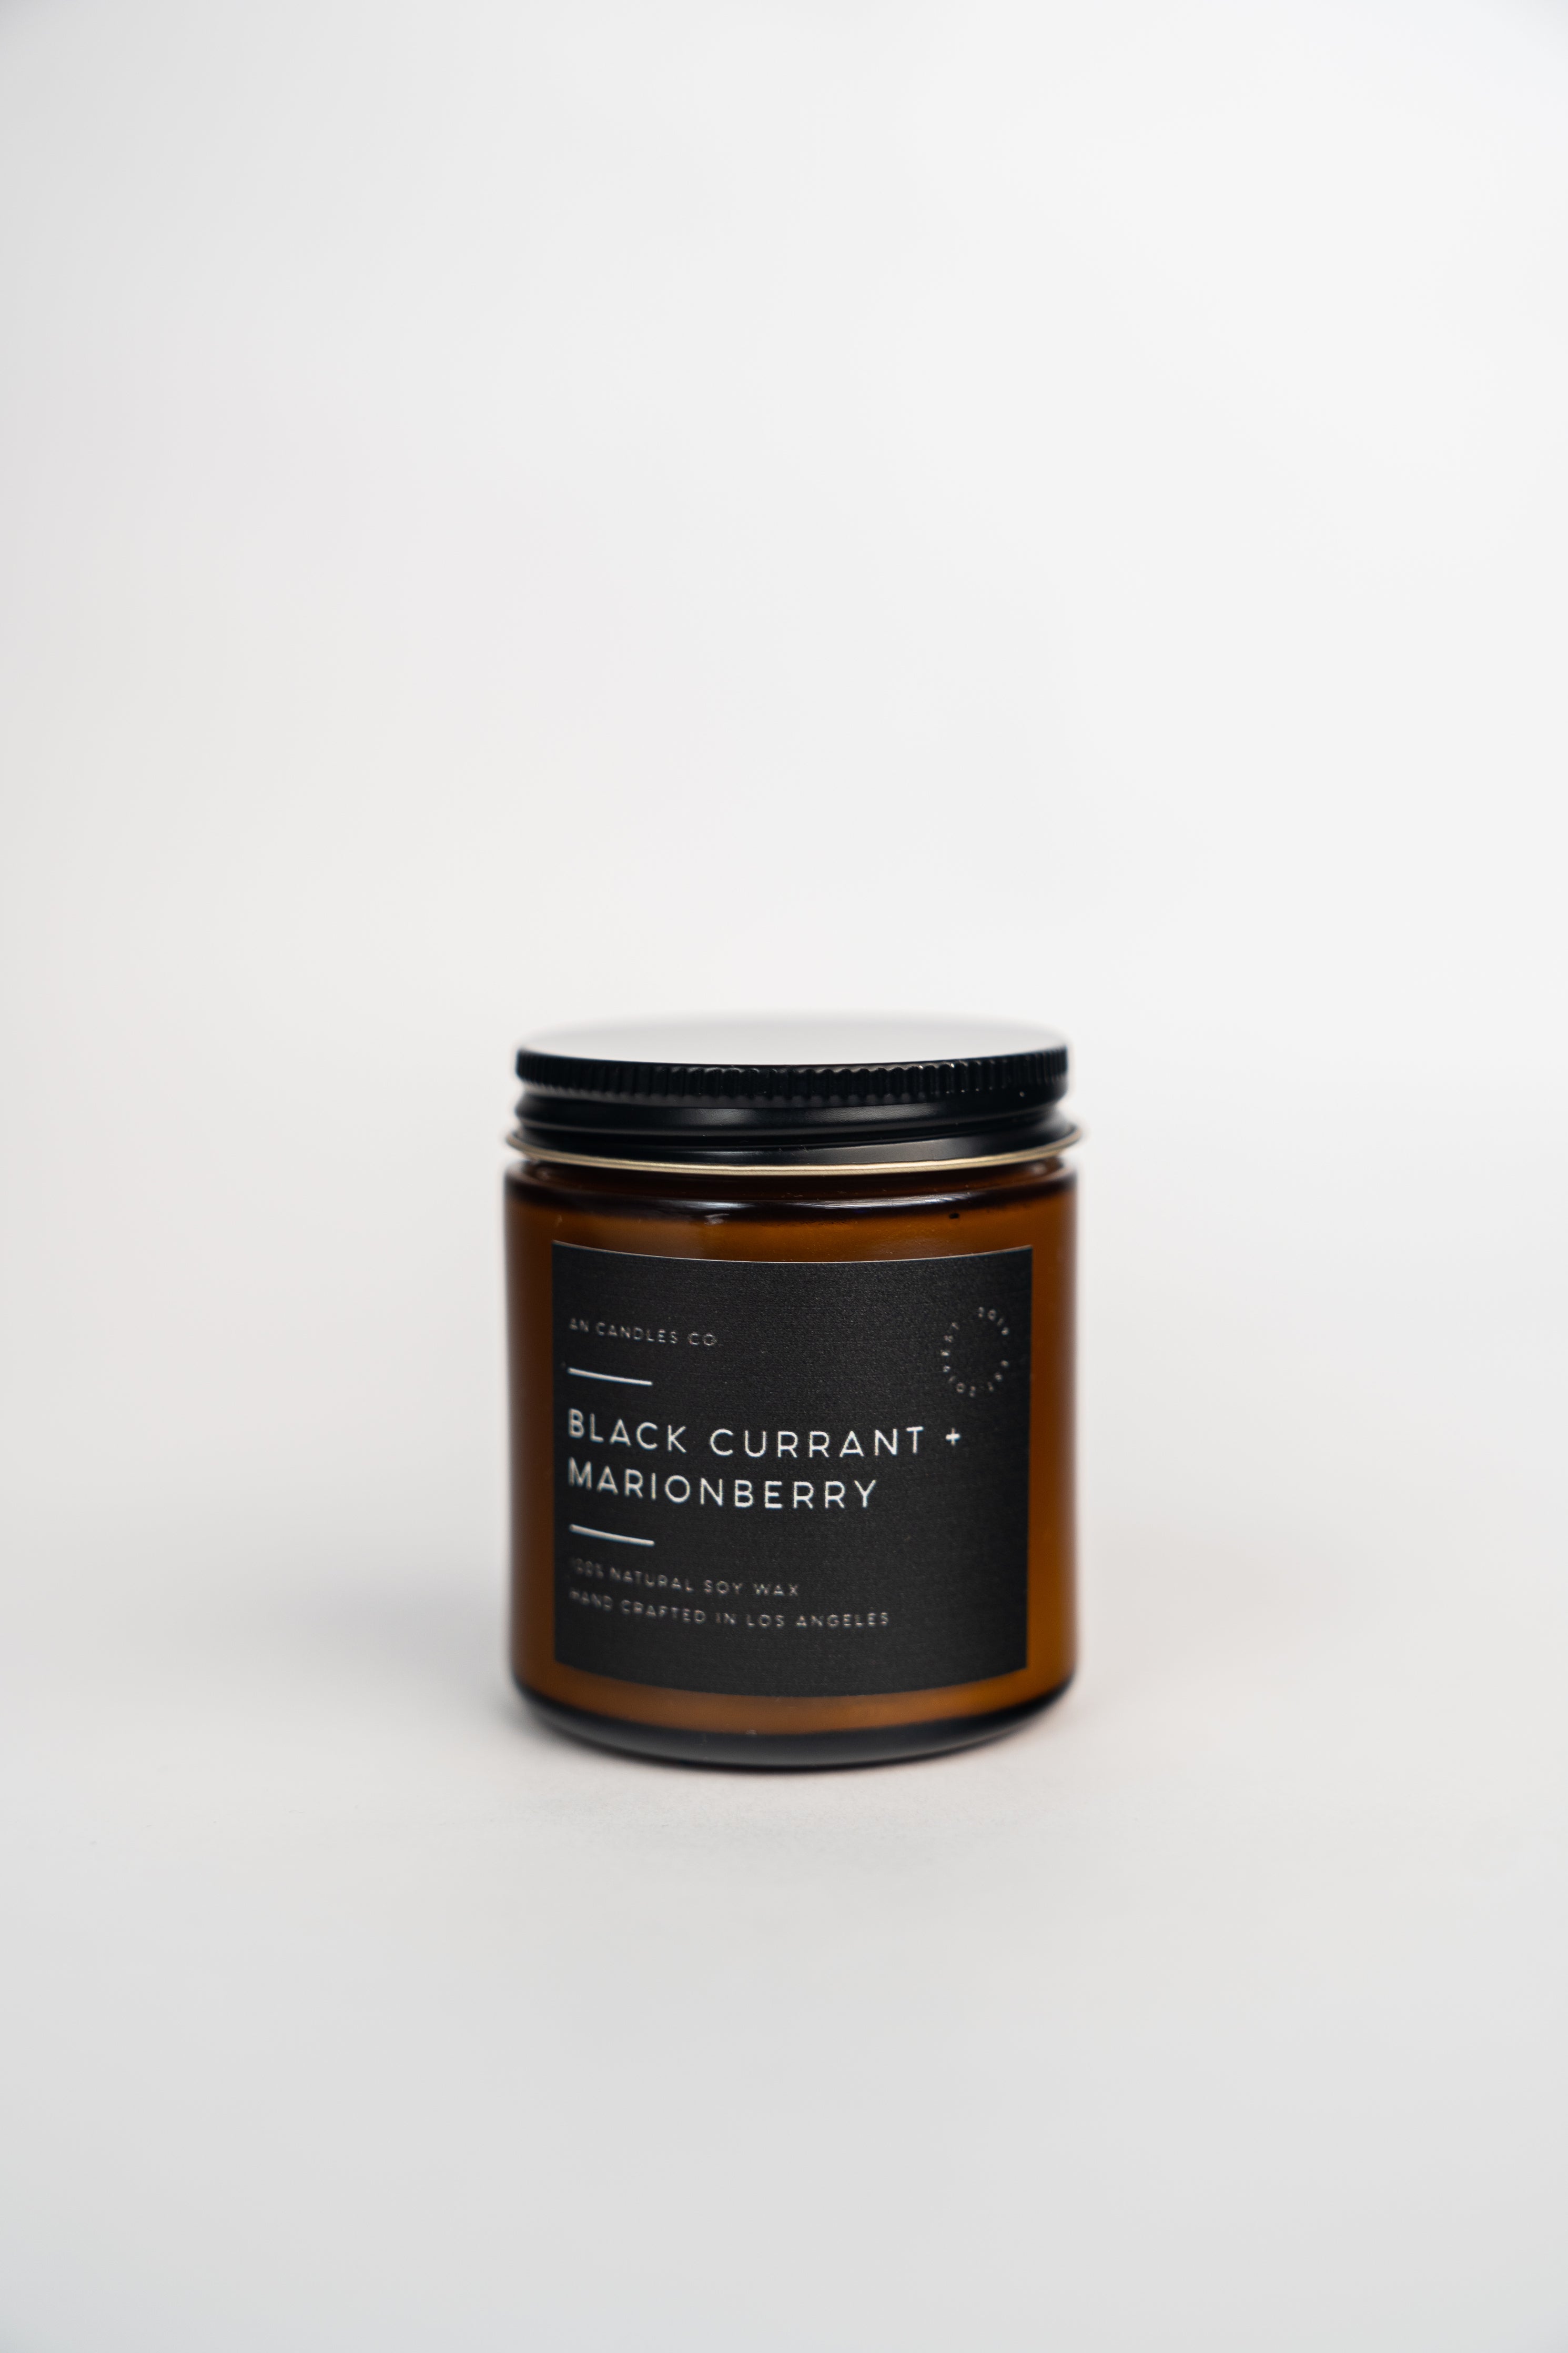 Candles – An Candles Co.